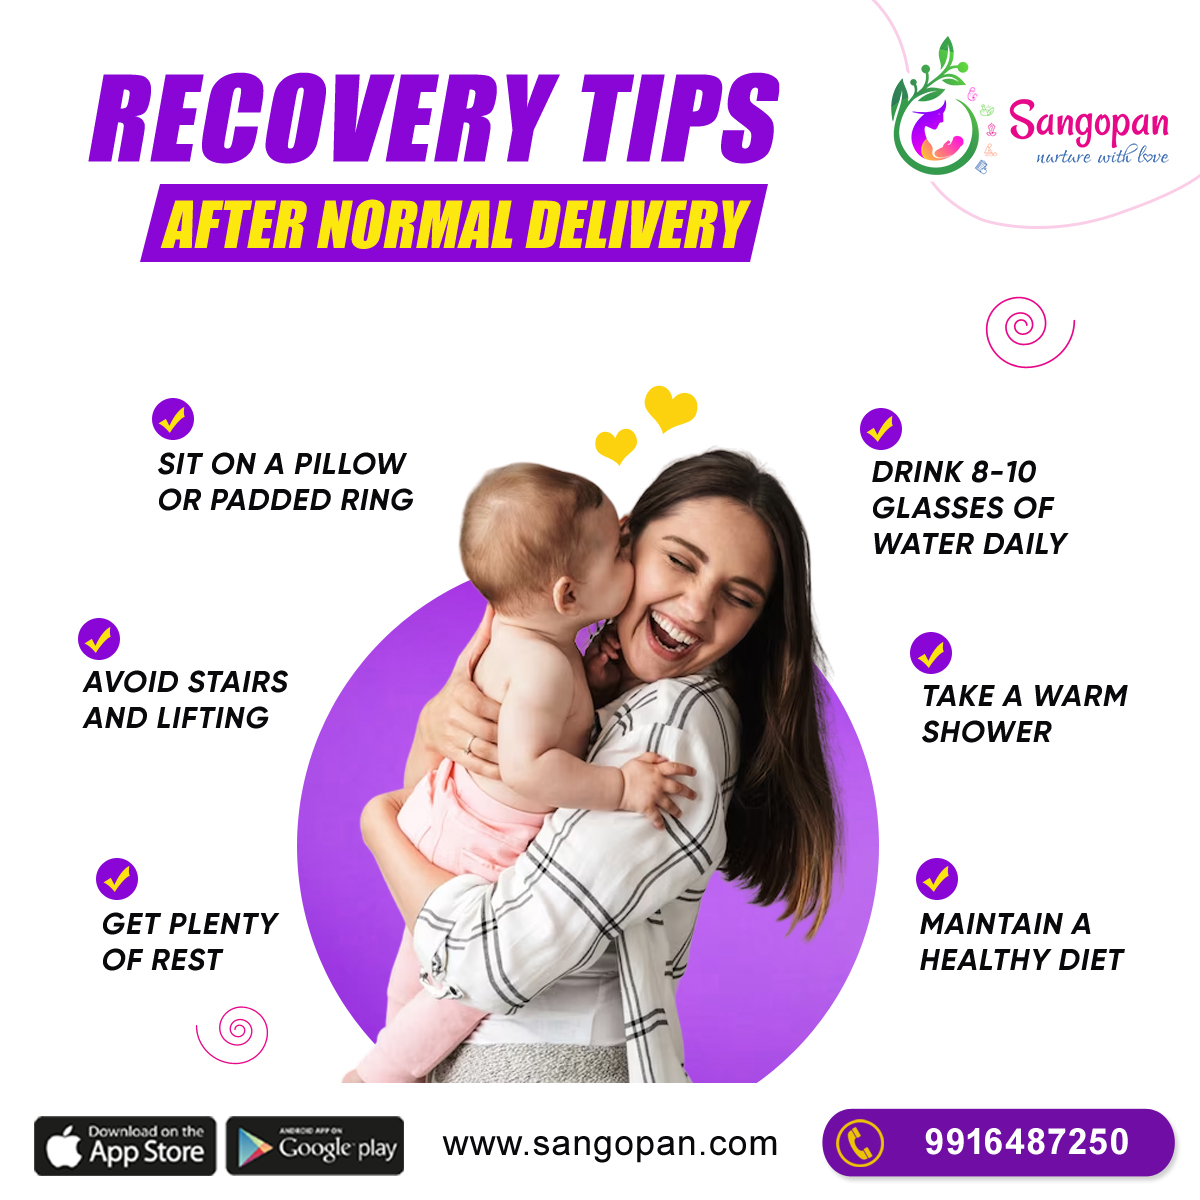 Recovery Tips after normal delivery! Postnatal Massage for New Mom from the comfort of your home! sangopan.com/products/postn… #sangopan #mothercare #postnatalcare #pregnancy #pregnancyjourney #pregnancymassage #postnatalmassage #momlife #india #pregnancytips #postnatalfitness